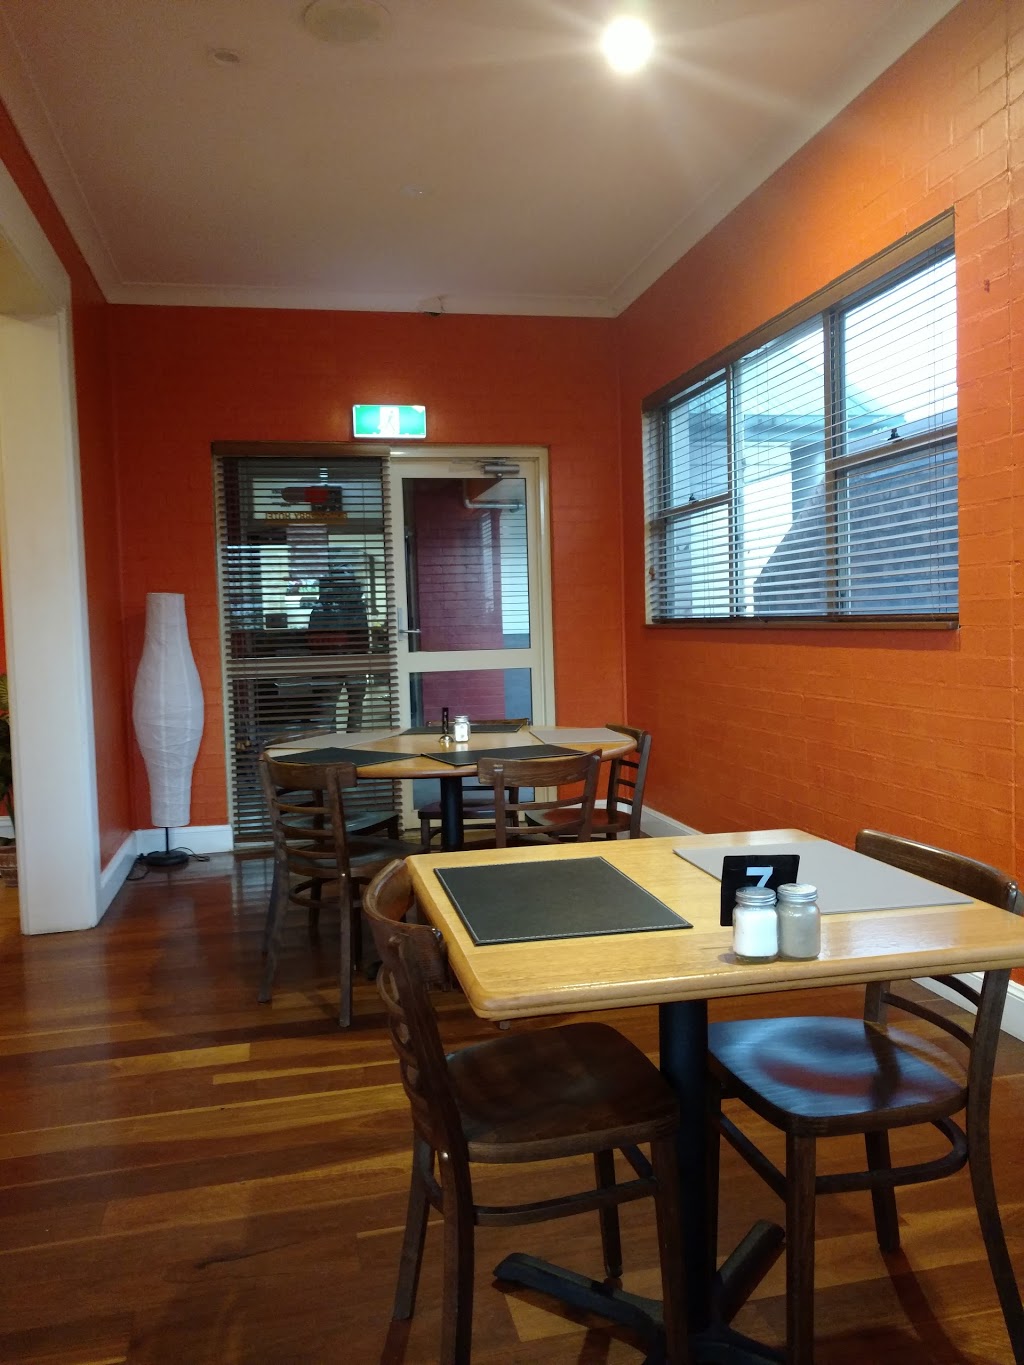 Bomaderry Hotel | restaurant | 71 Meroo St, Bomaderry NSW 2541, Australia | 0244212146 OR +61 2 4421 2146